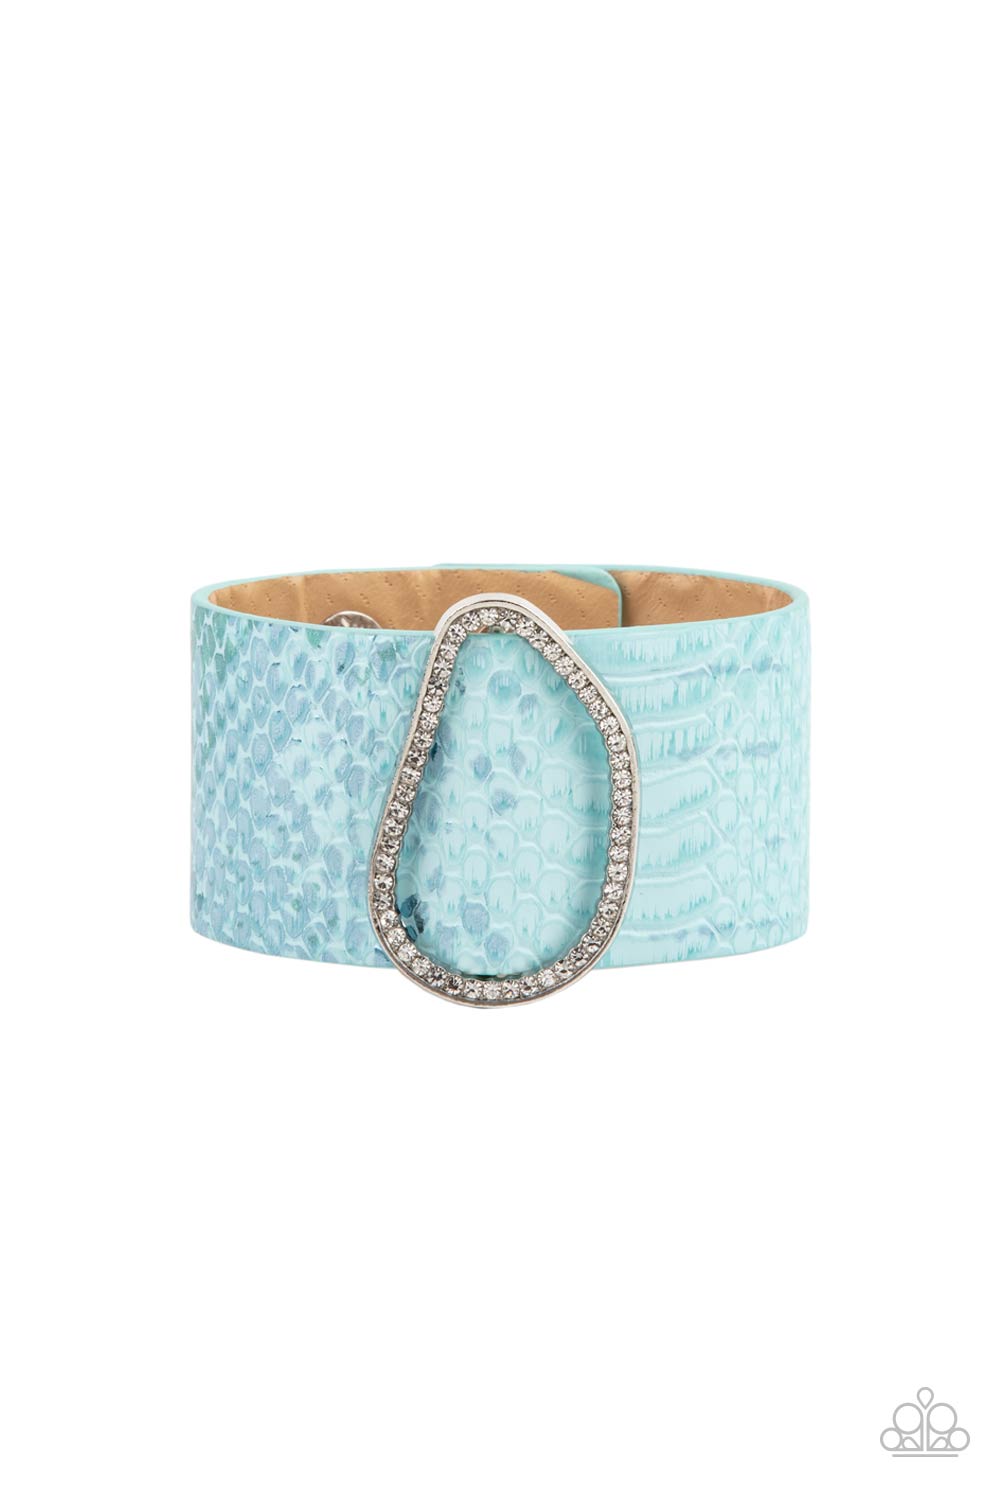 HISS-tory In The Making - Blue wrap bracelet